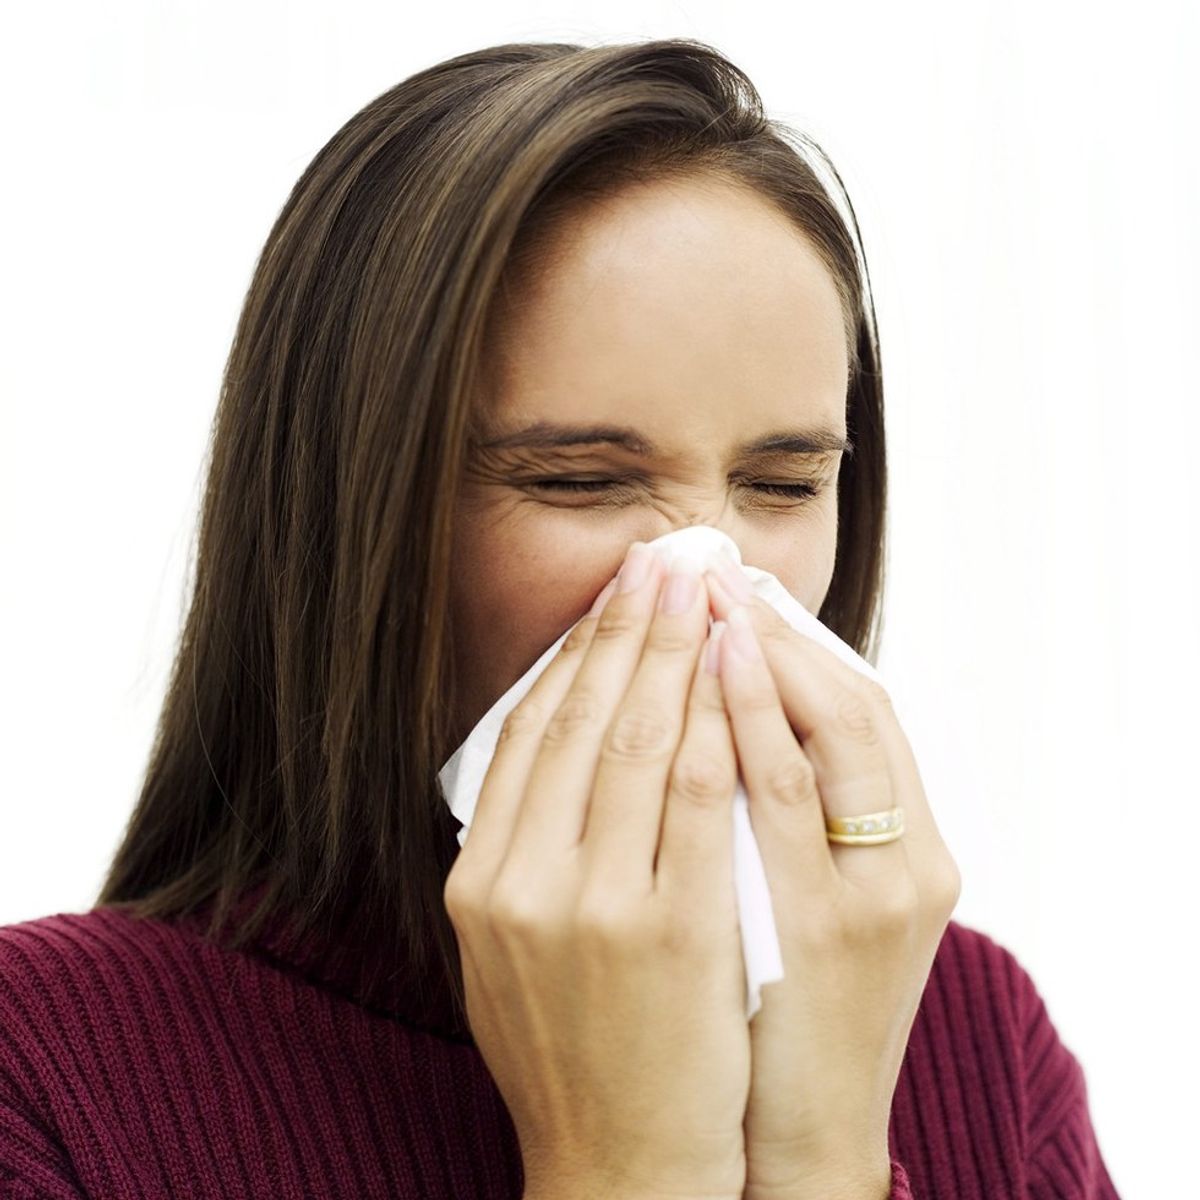 ACHOO Syndrome Can Induce Sneezing